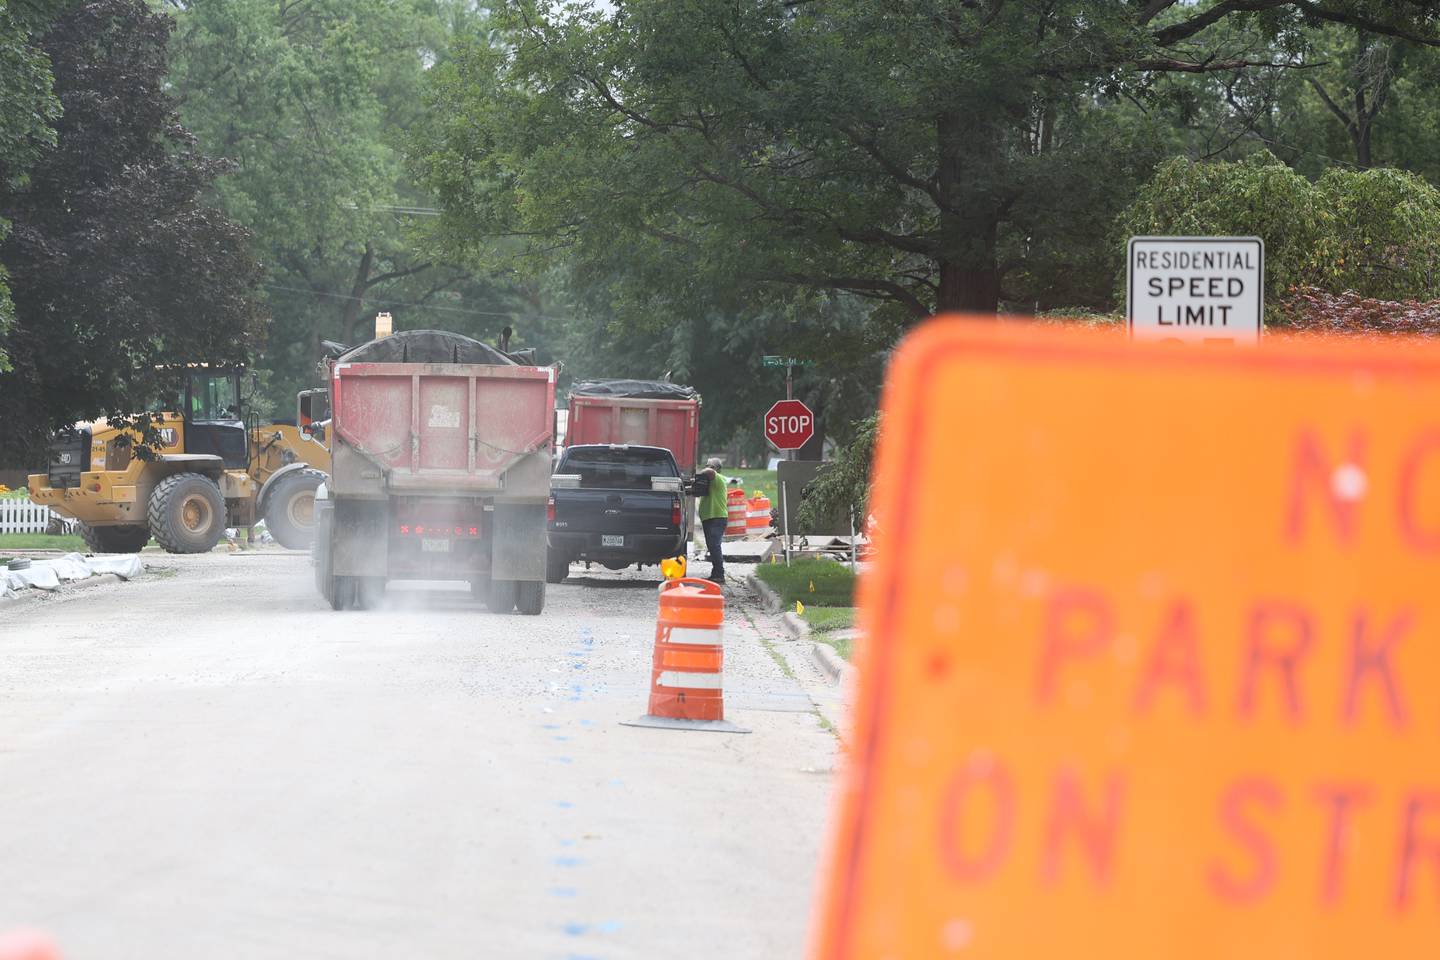 Construction workers take over White Avenue while working on water lines in Joliet. Thursday, August 4, 2022 in Joliet.